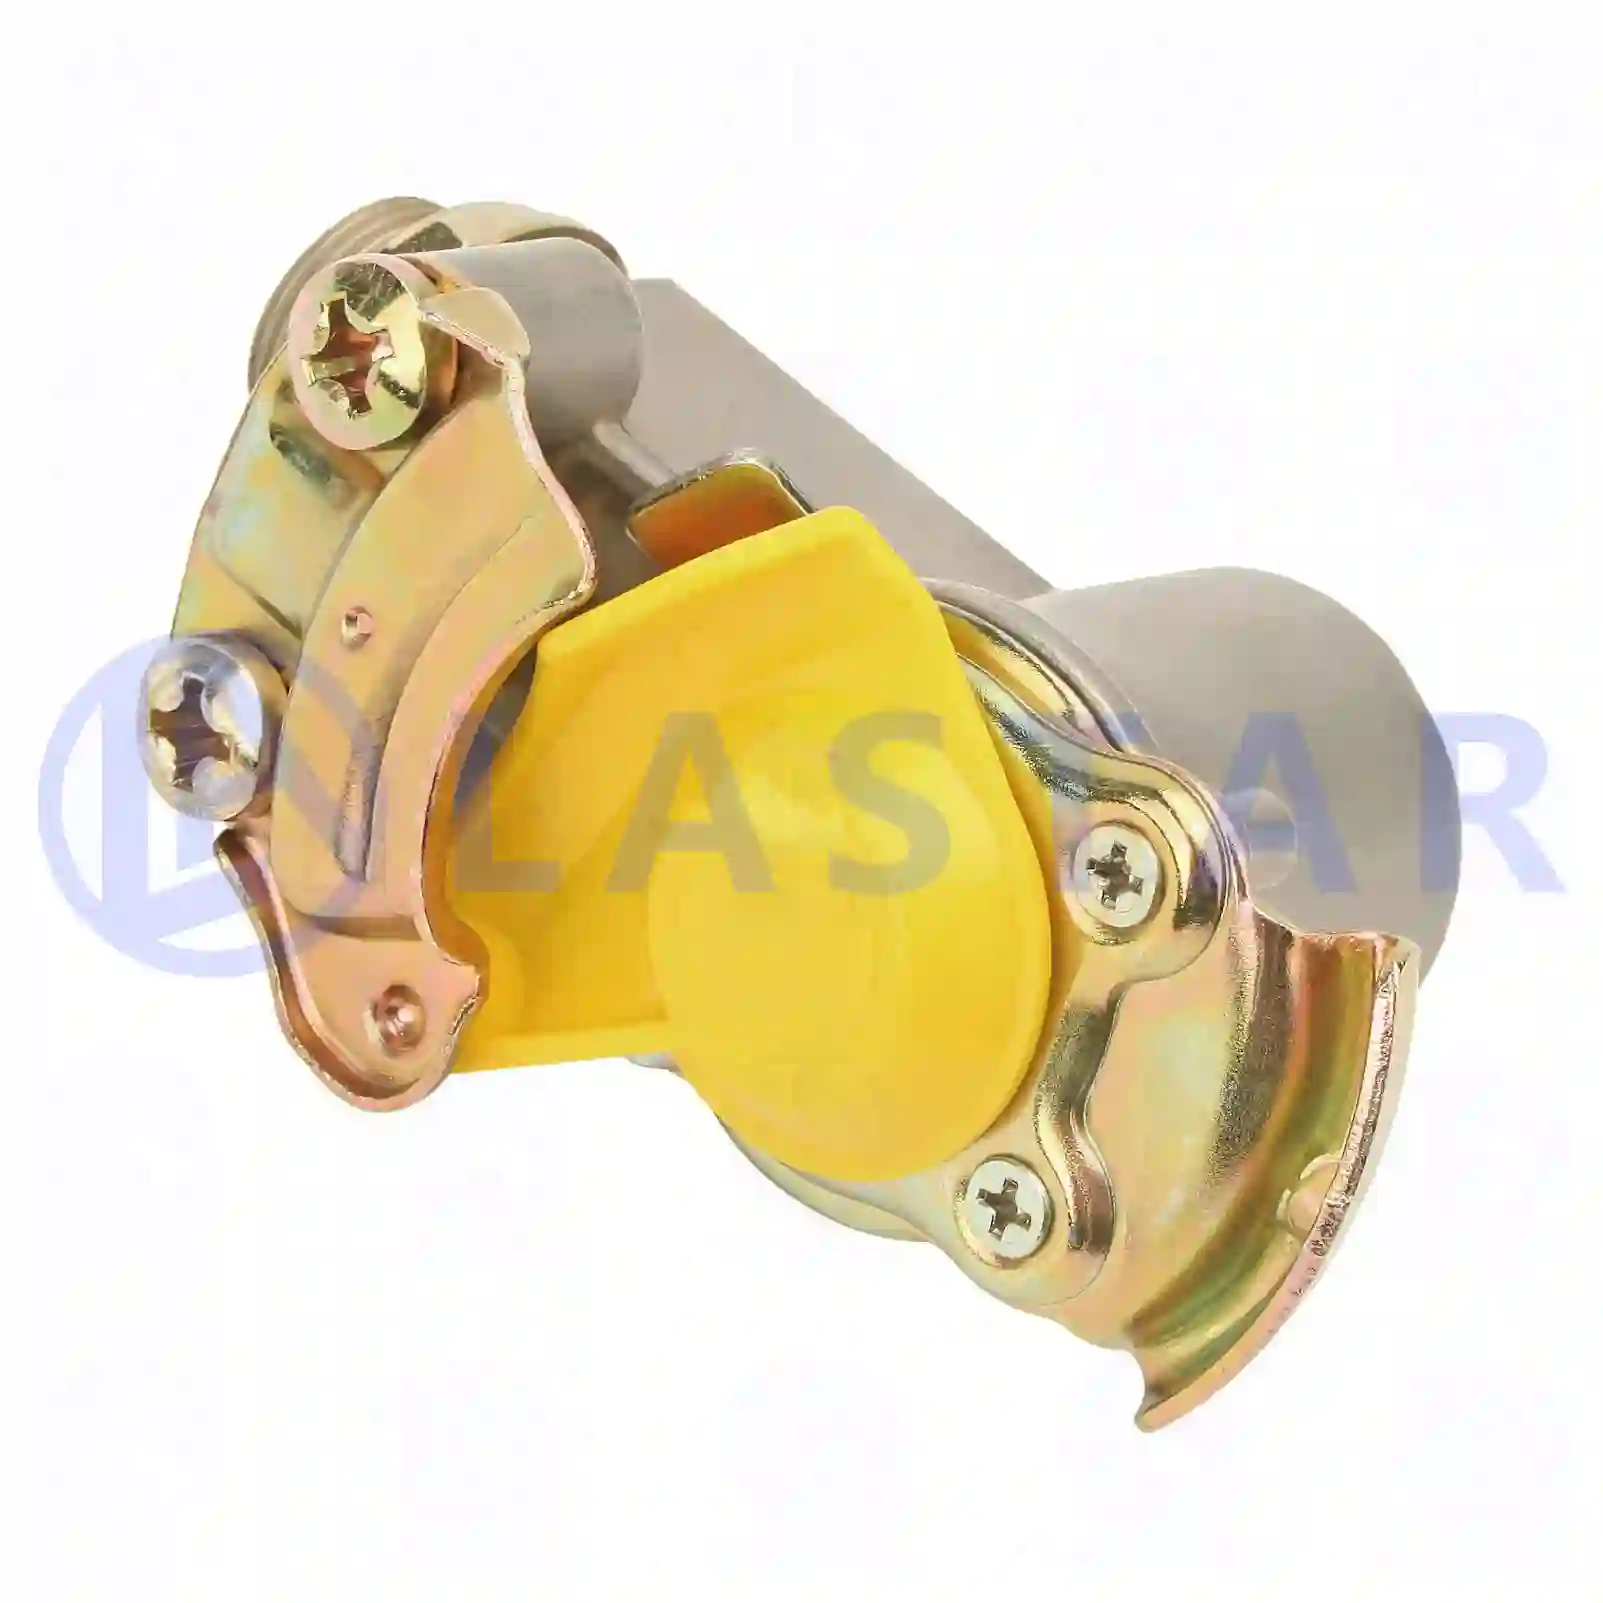 Palm coupling, yellow lid, with pipe filter, 77725448, 1518206, 21151103103, 6500331, 5058203290, 5820329, 81998062077, AIF1174, 1912348, 1020771, 55106, WA9522010010 ||  77725448 Lastar Spare Part | Truck Spare Parts, Auotomotive Spare Parts Palm coupling, yellow lid, with pipe filter, 77725448, 1518206, 21151103103, 6500331, 5058203290, 5820329, 81998062077, AIF1174, 1912348, 1020771, 55106, WA9522010010 ||  77725448 Lastar Spare Part | Truck Spare Parts, Auotomotive Spare Parts